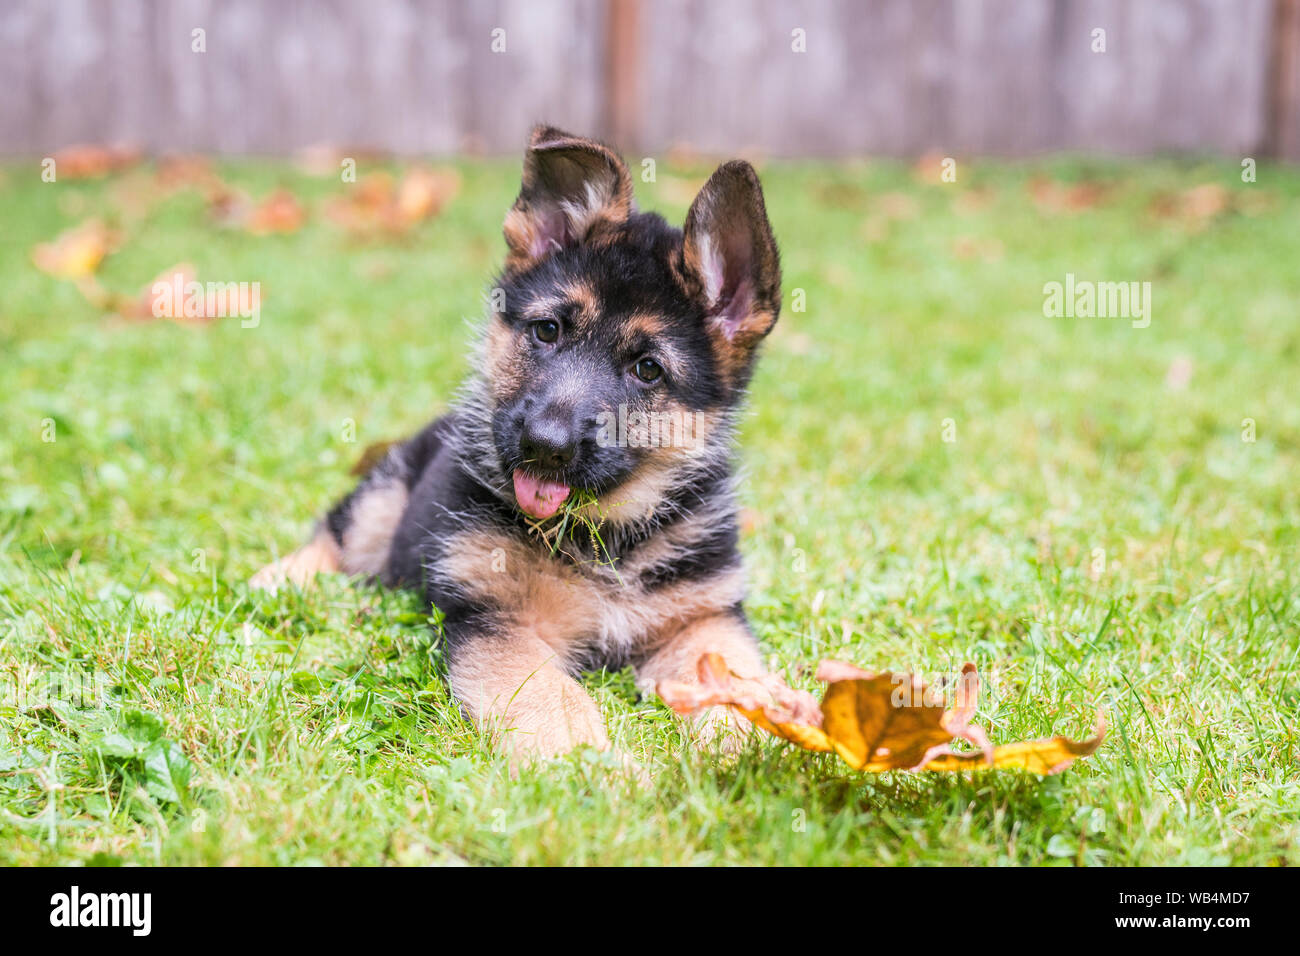 German Shepherd puppy sticking her tongue out, sitting in yard. Stock Photo